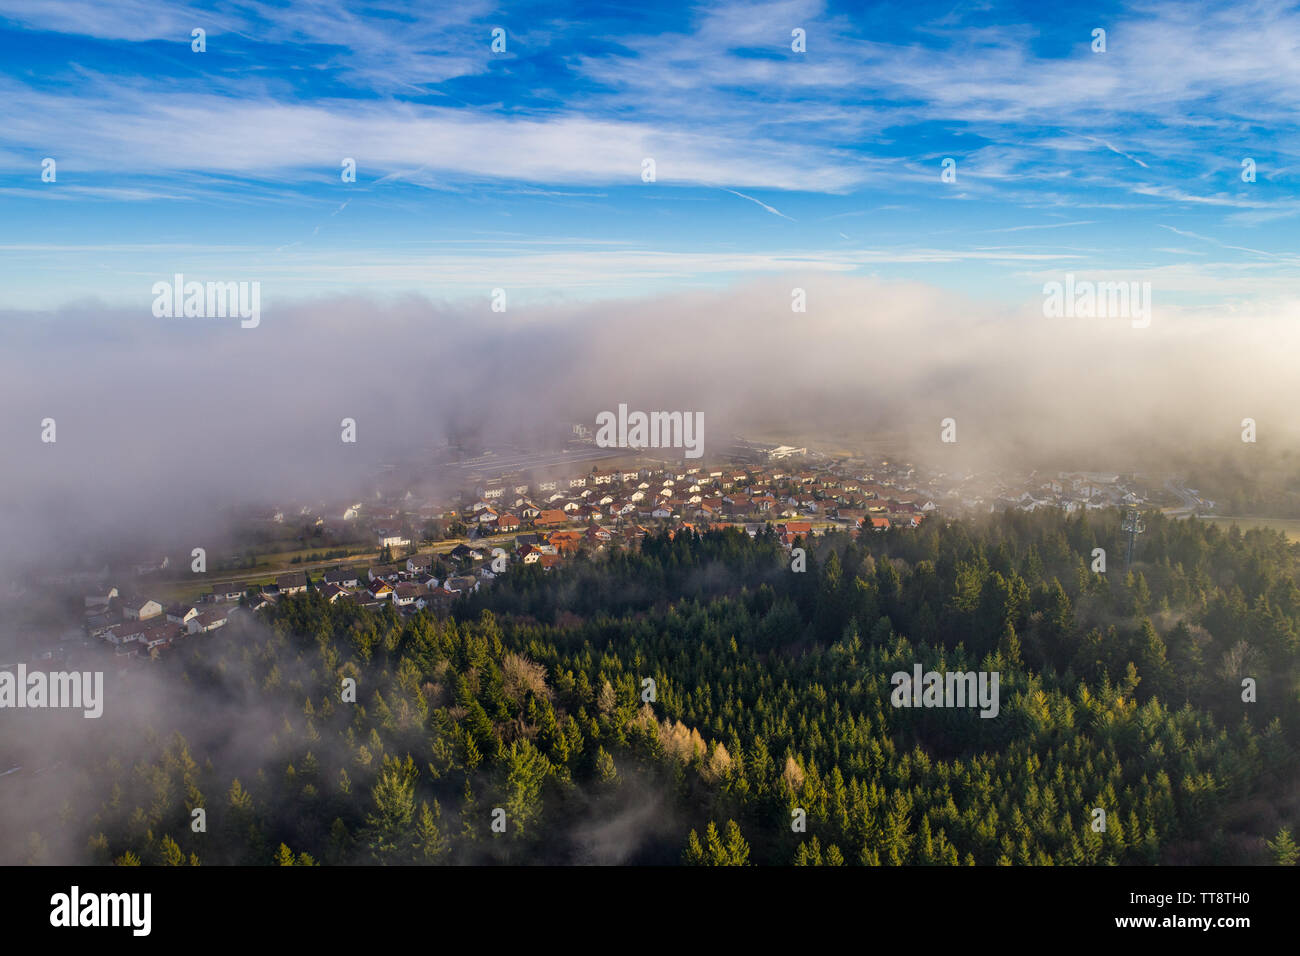 Aerial view out of the clouds Stock Photo